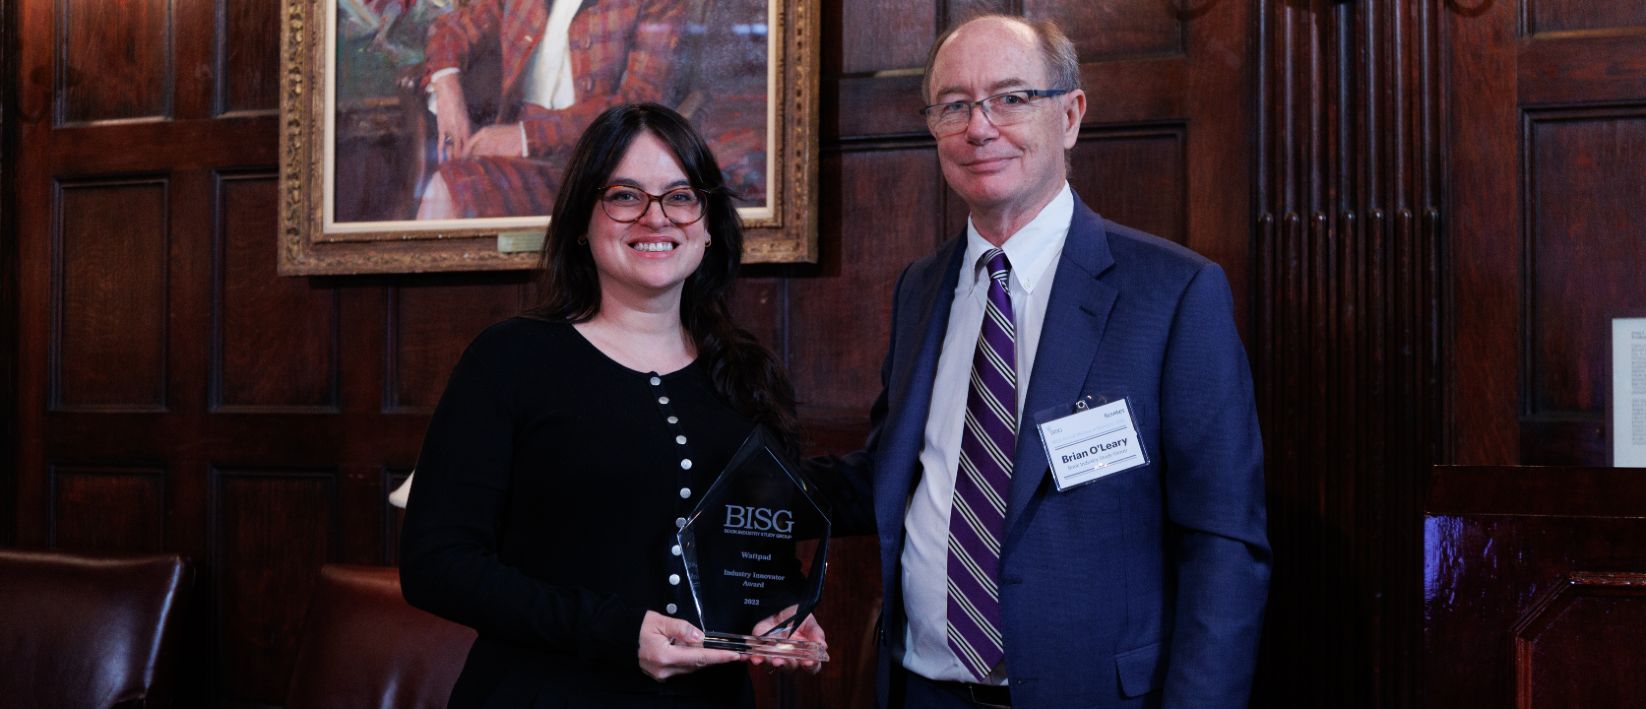 A man and a woman at a BISG event. The woman is holding an award labelled 